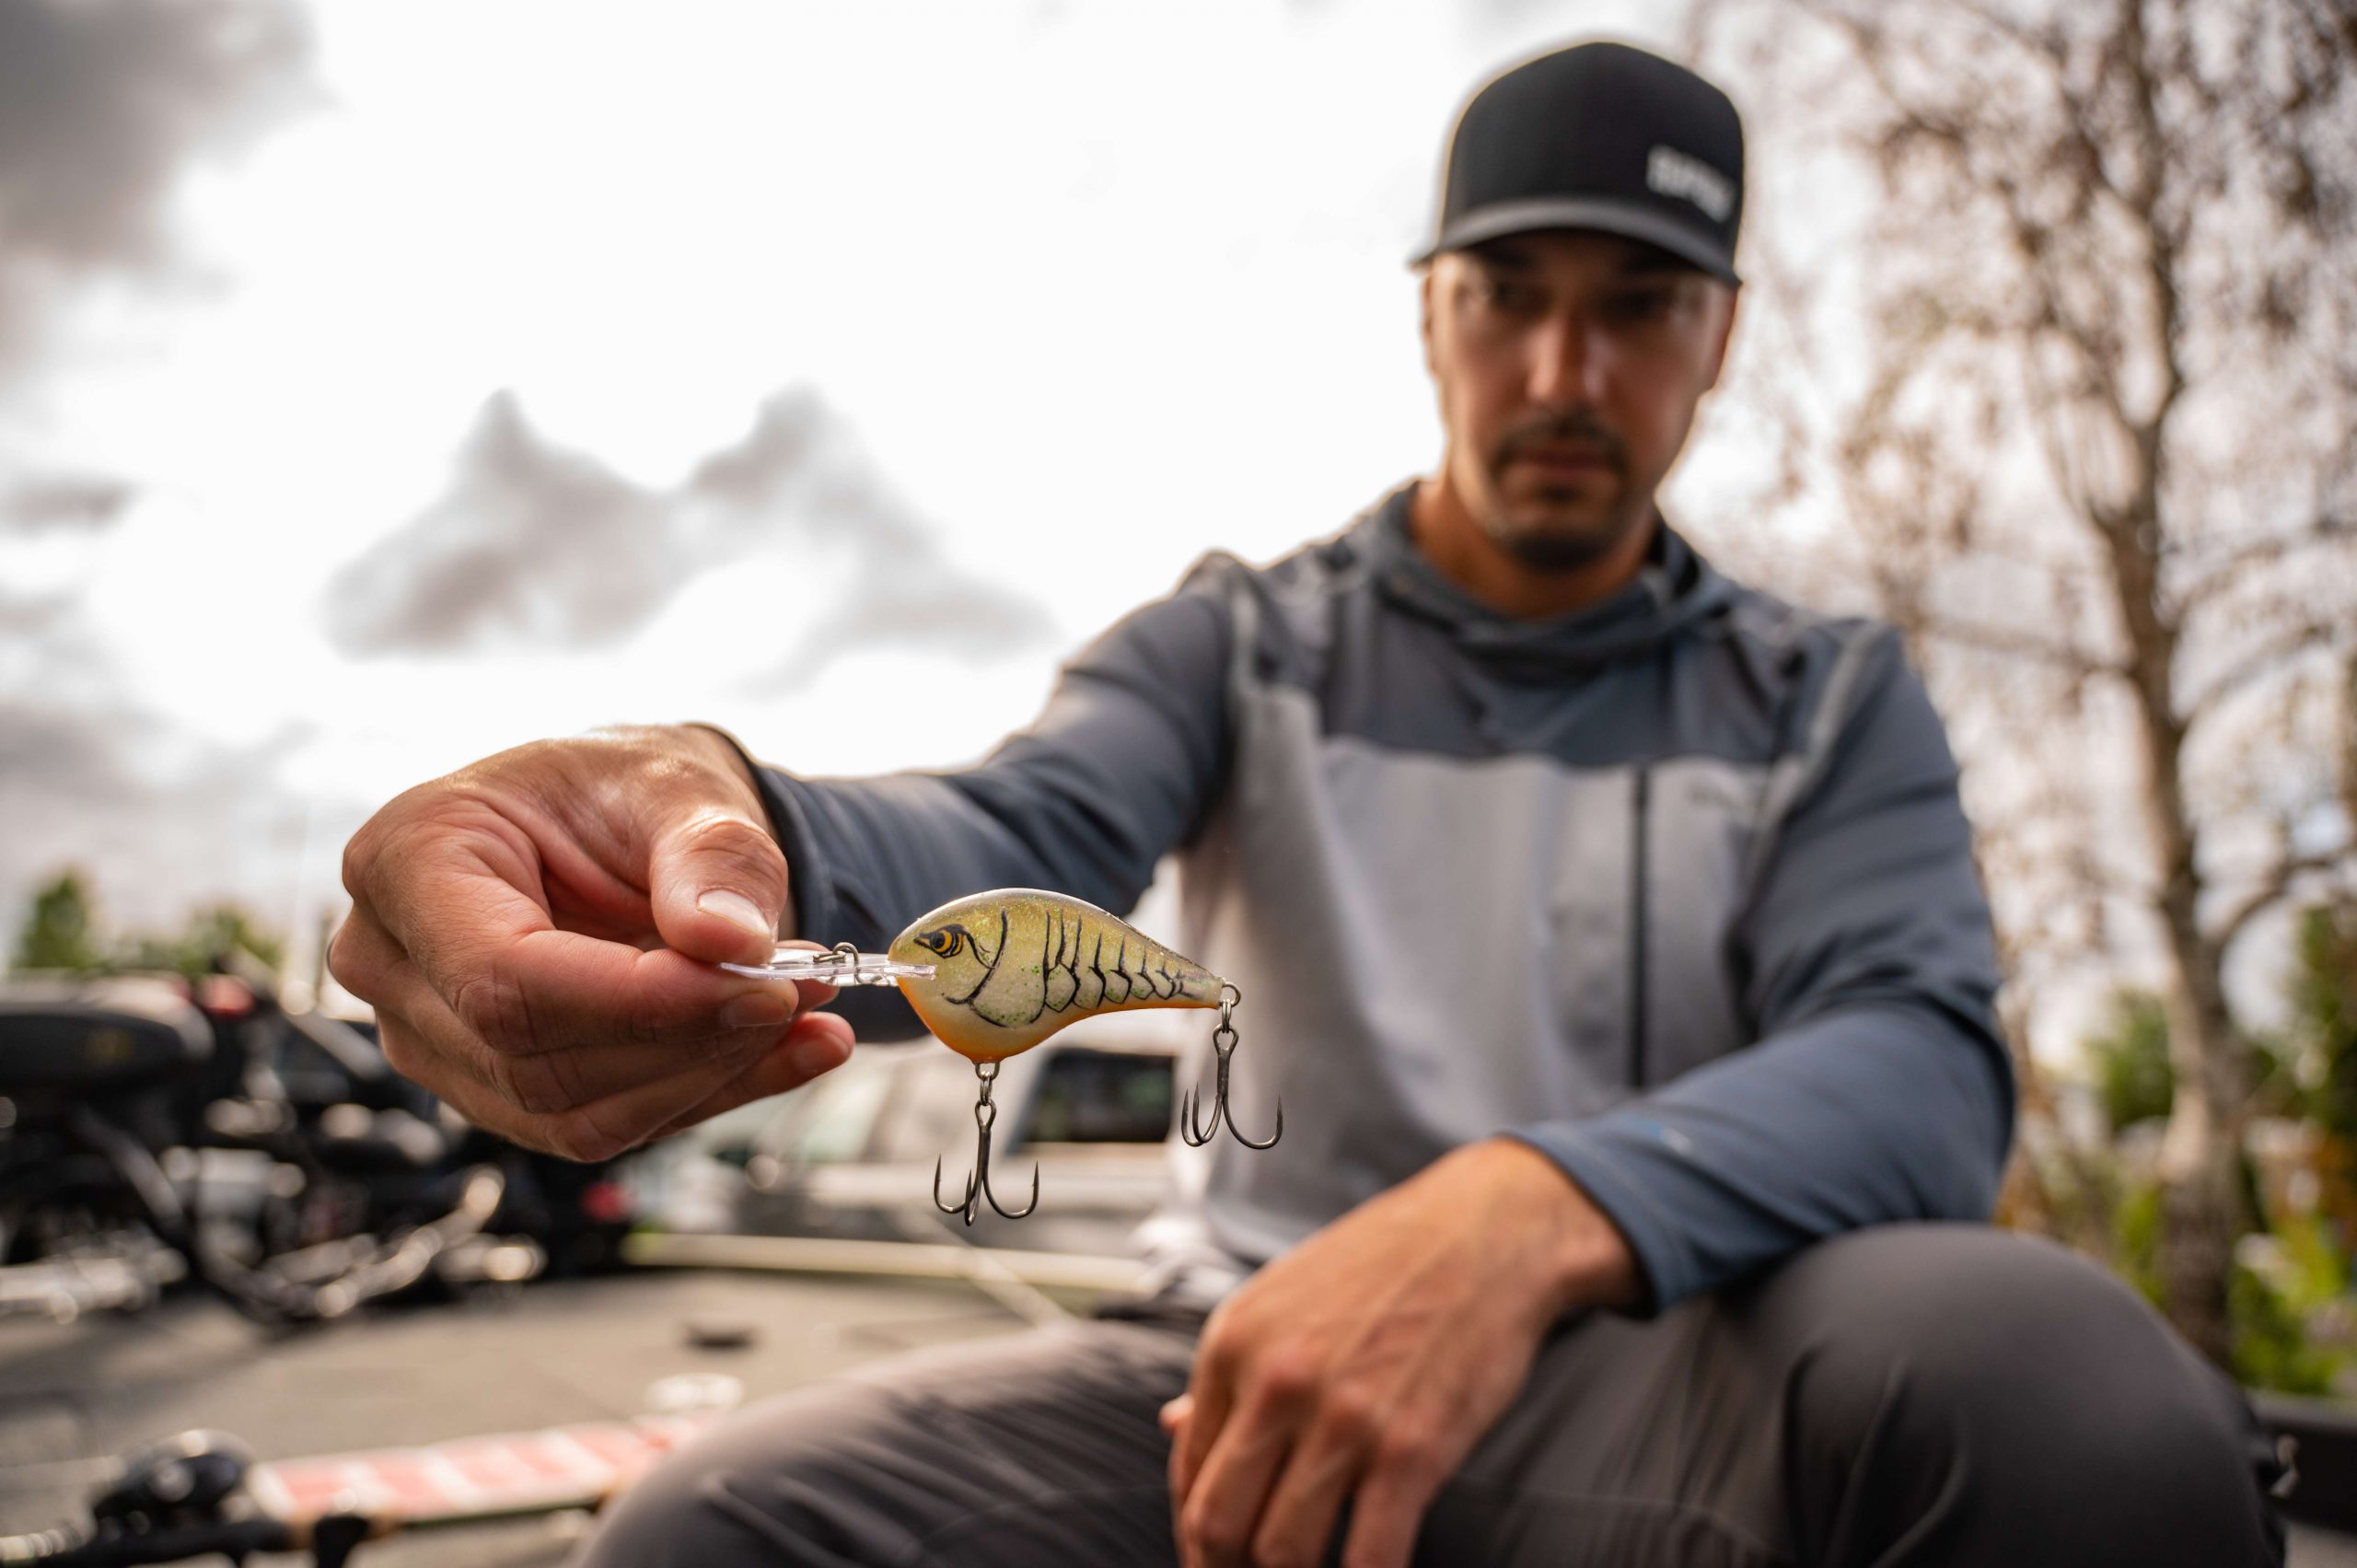 And, a Rapala DT10 is the bait of choice.<br>
<br>
âI like to use this crankbait to cover lots of water, and the typical area is 10- to 15-feet of water on shoals and reefs.â